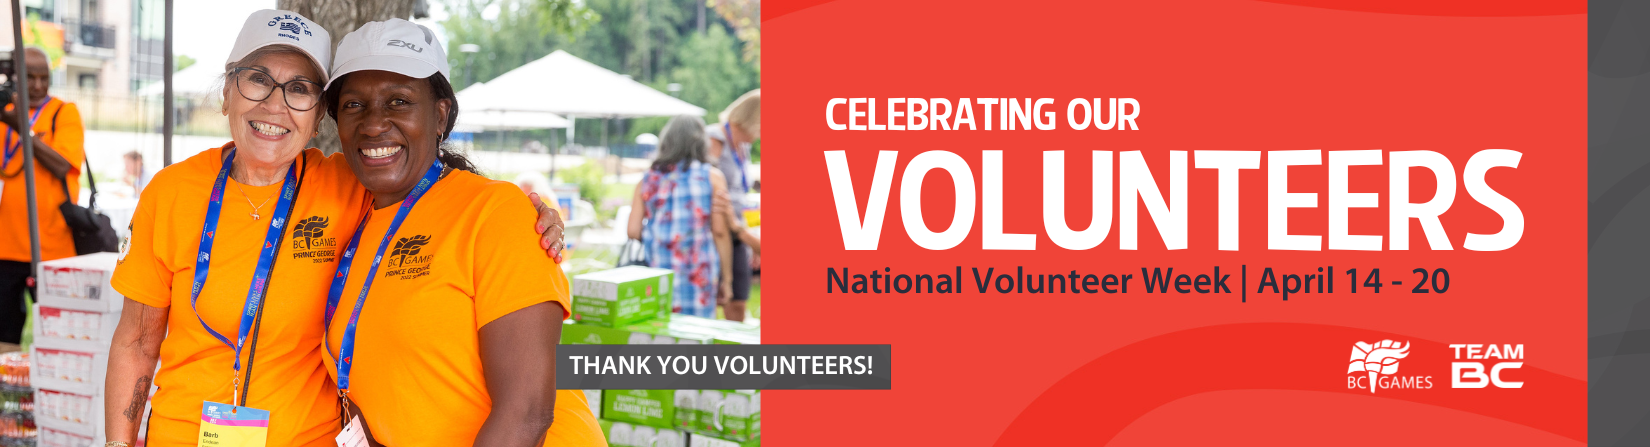 Celebrating our volunteers banner with image of two volunteers smiling.